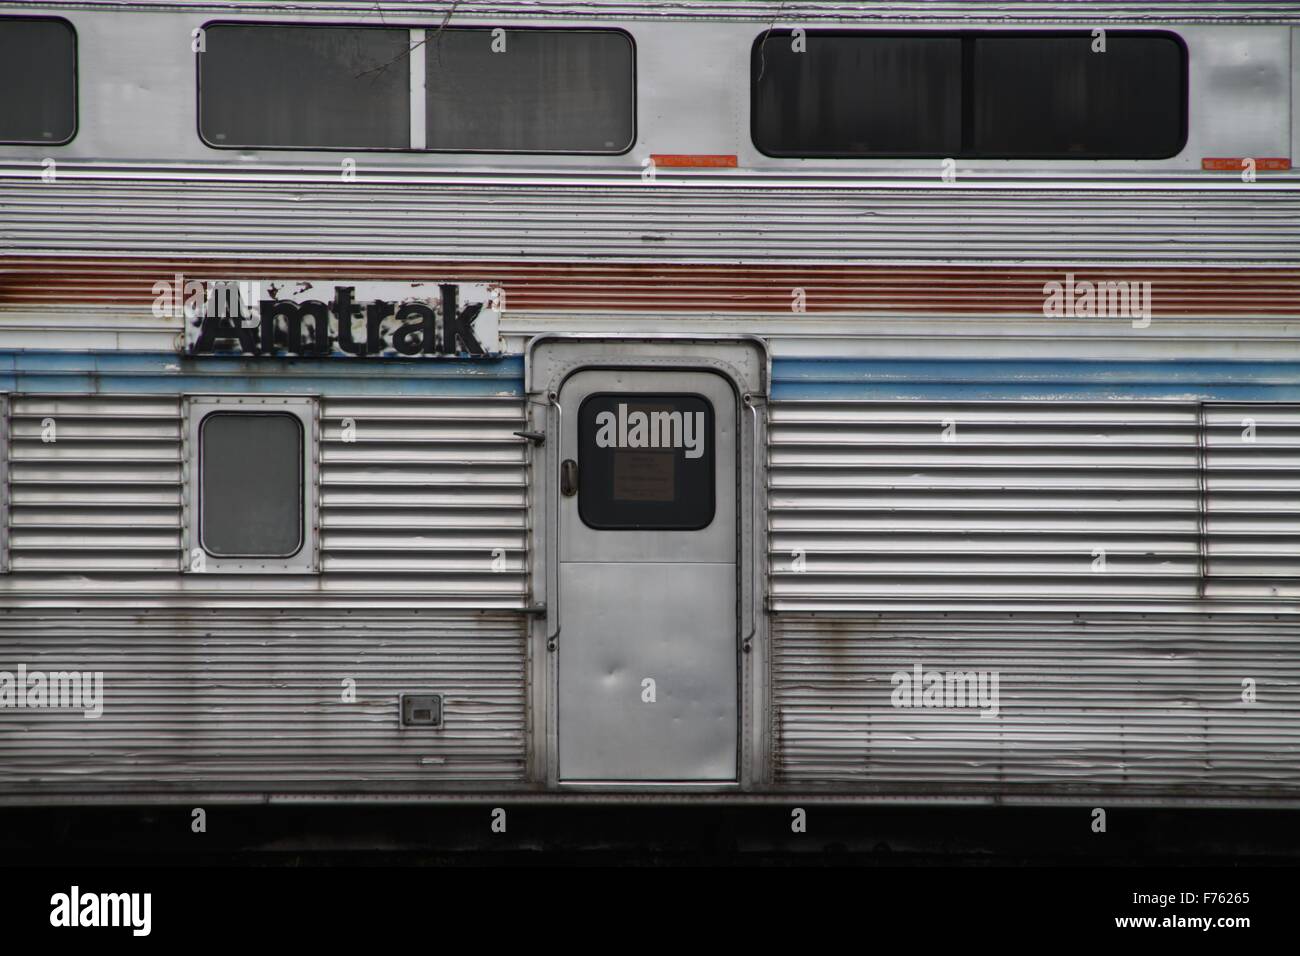 Weathered, Amtrak passenger car, retired from service Stock Photo